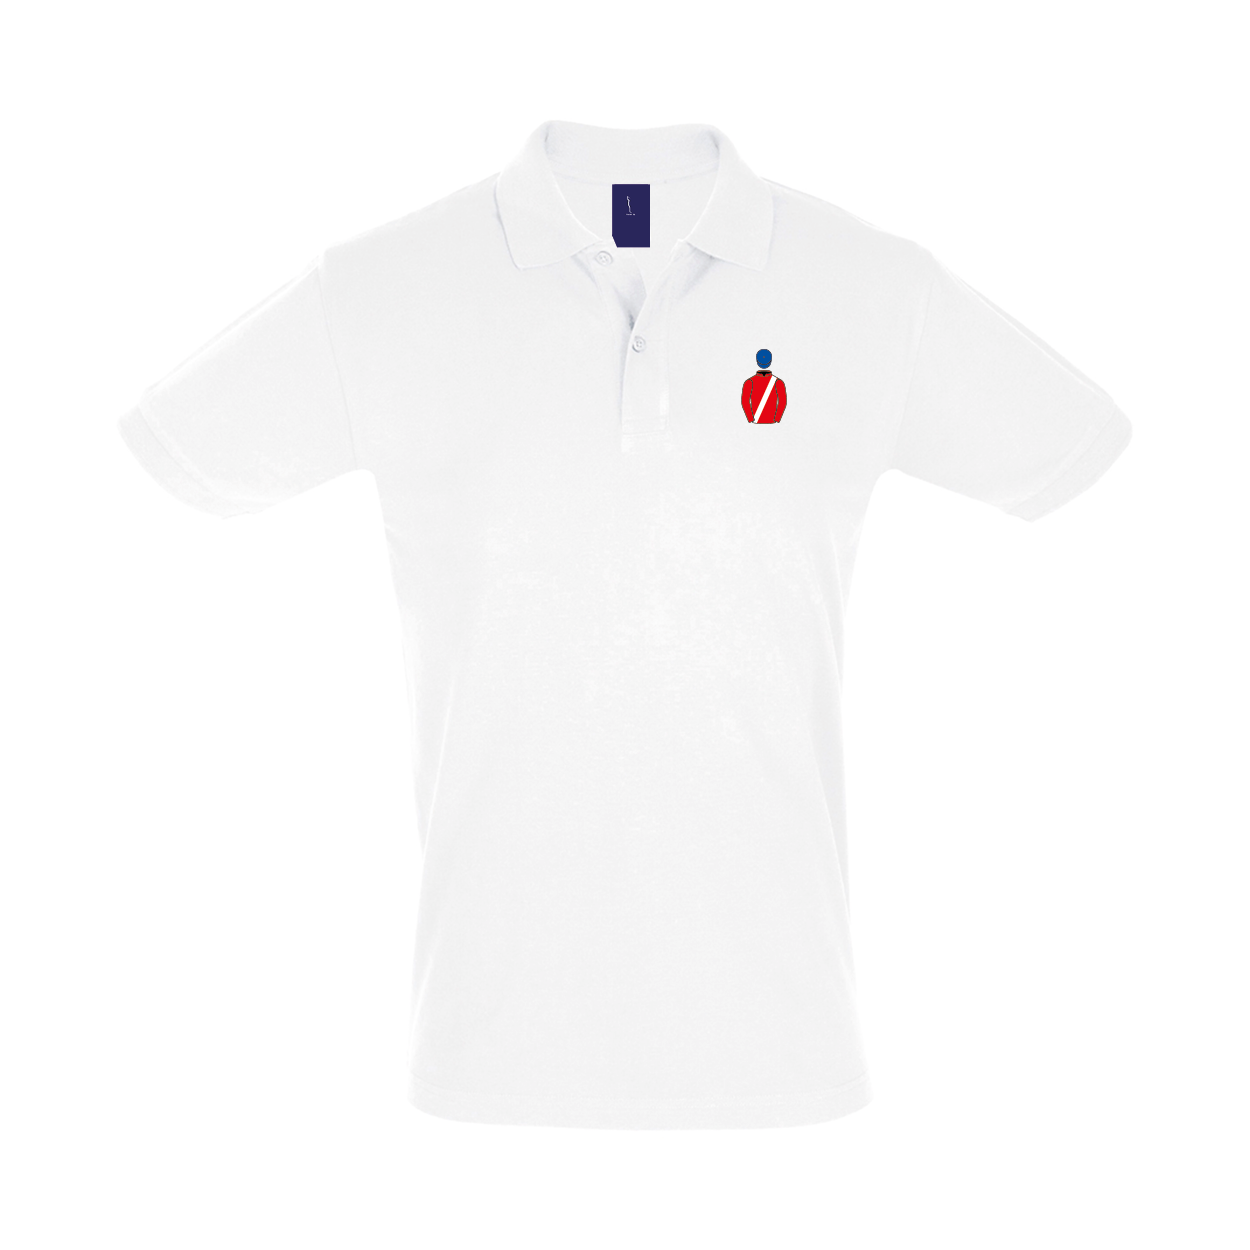 Ladies Cheveley Park Stud Embroidered Polo Shirt - Clothing - Hacked Up